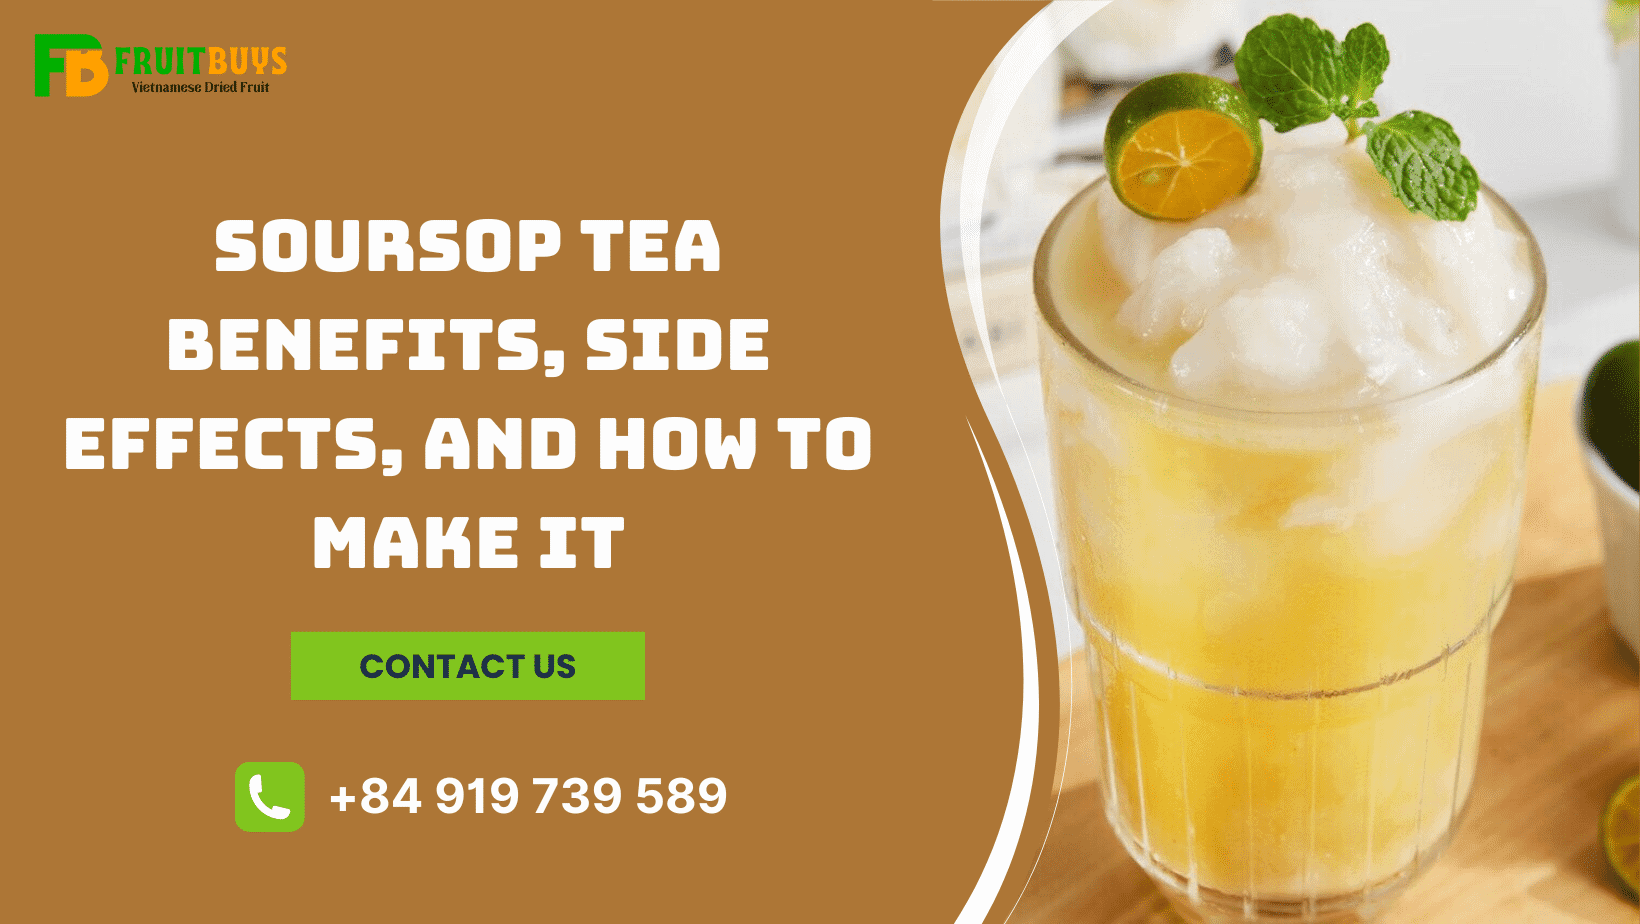 FruitBuys Vietnam Soursop Tea Benefits, Side Effects, And How To Make It